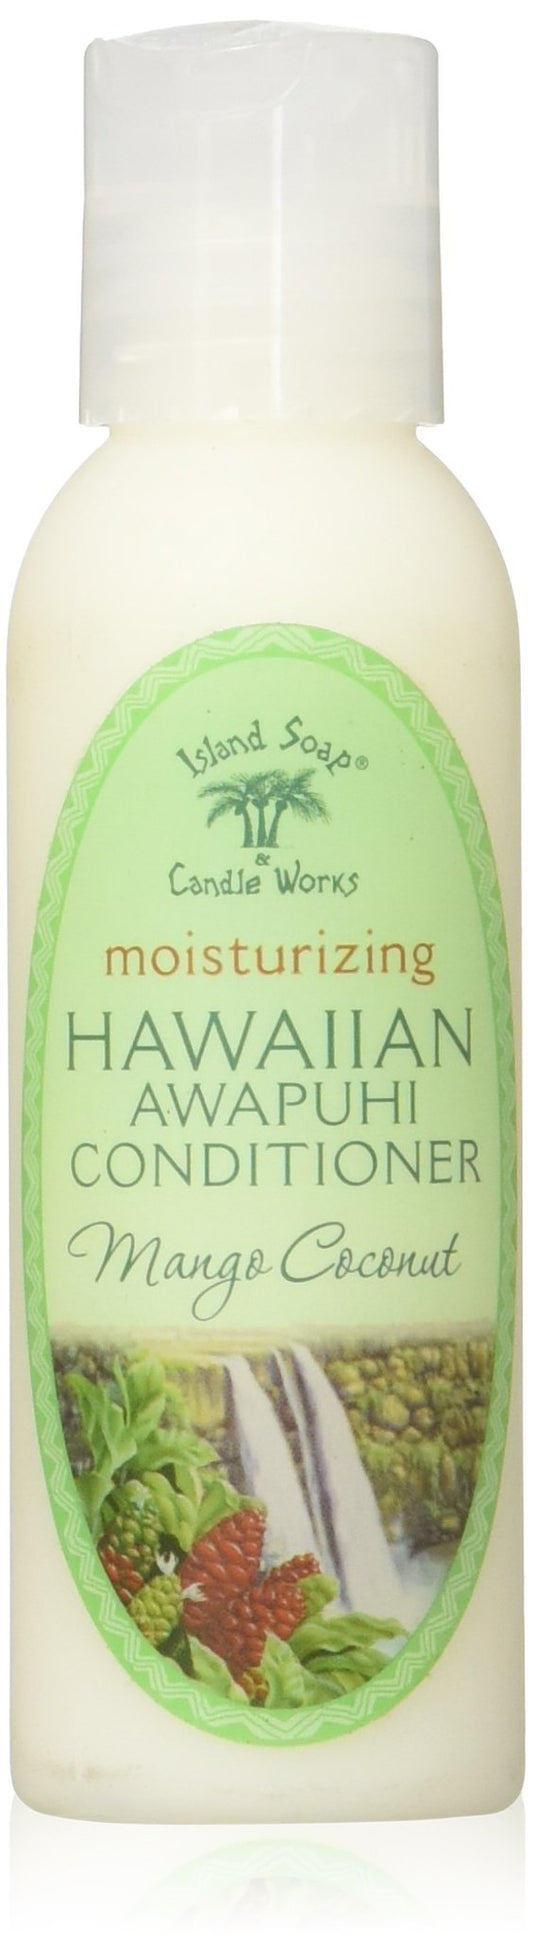 Island Soap & Candle Works Conditioner, 2 Ounce